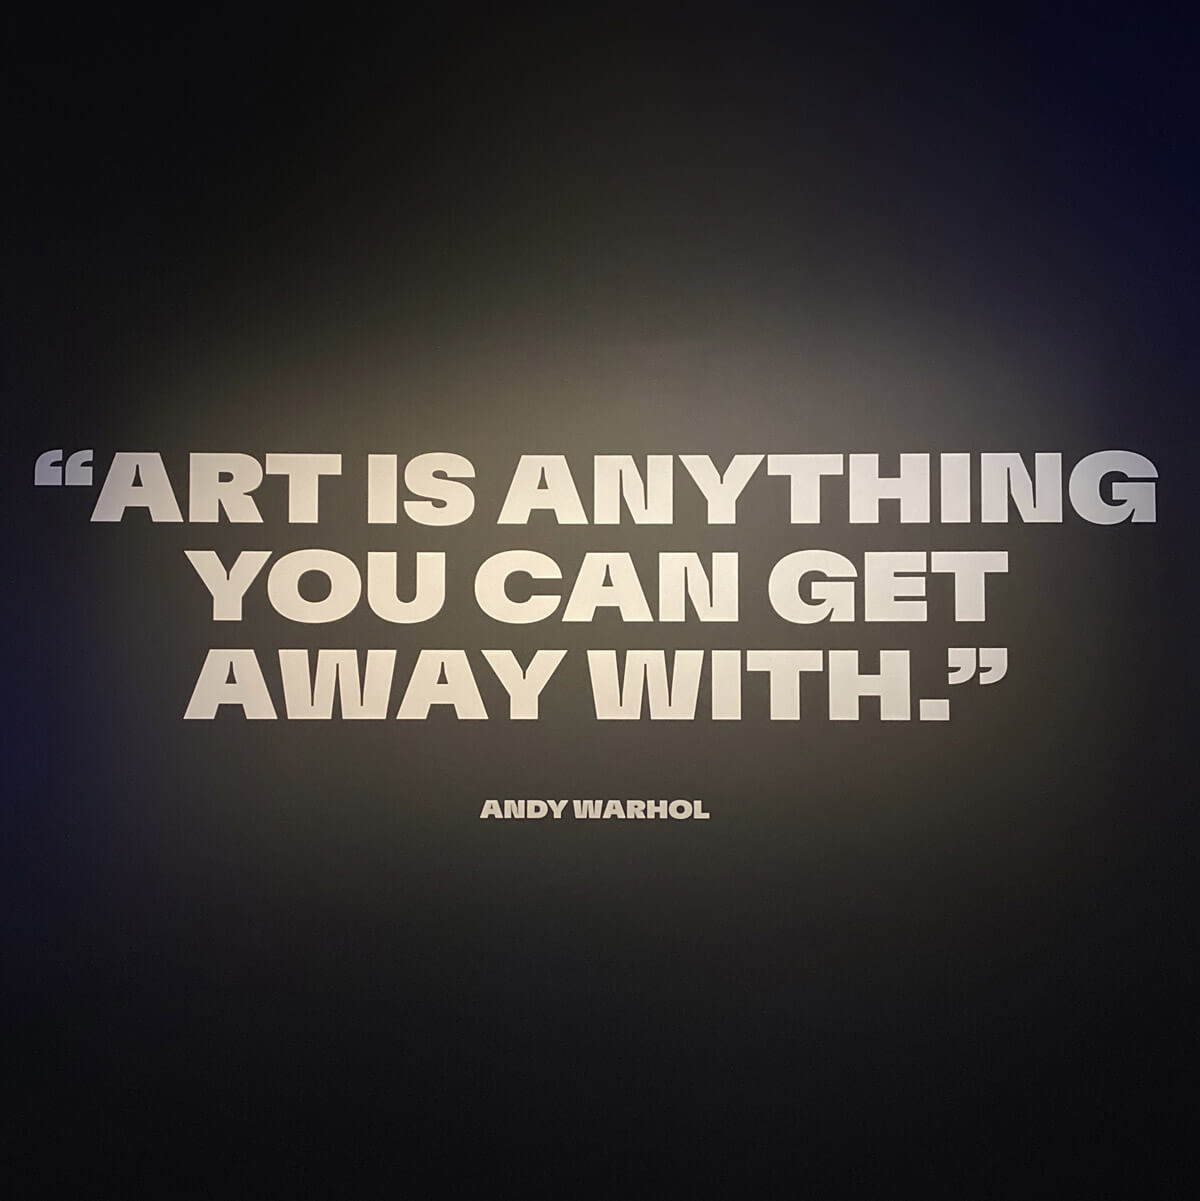 "Art is anything you can get away with." - Andy Warhol